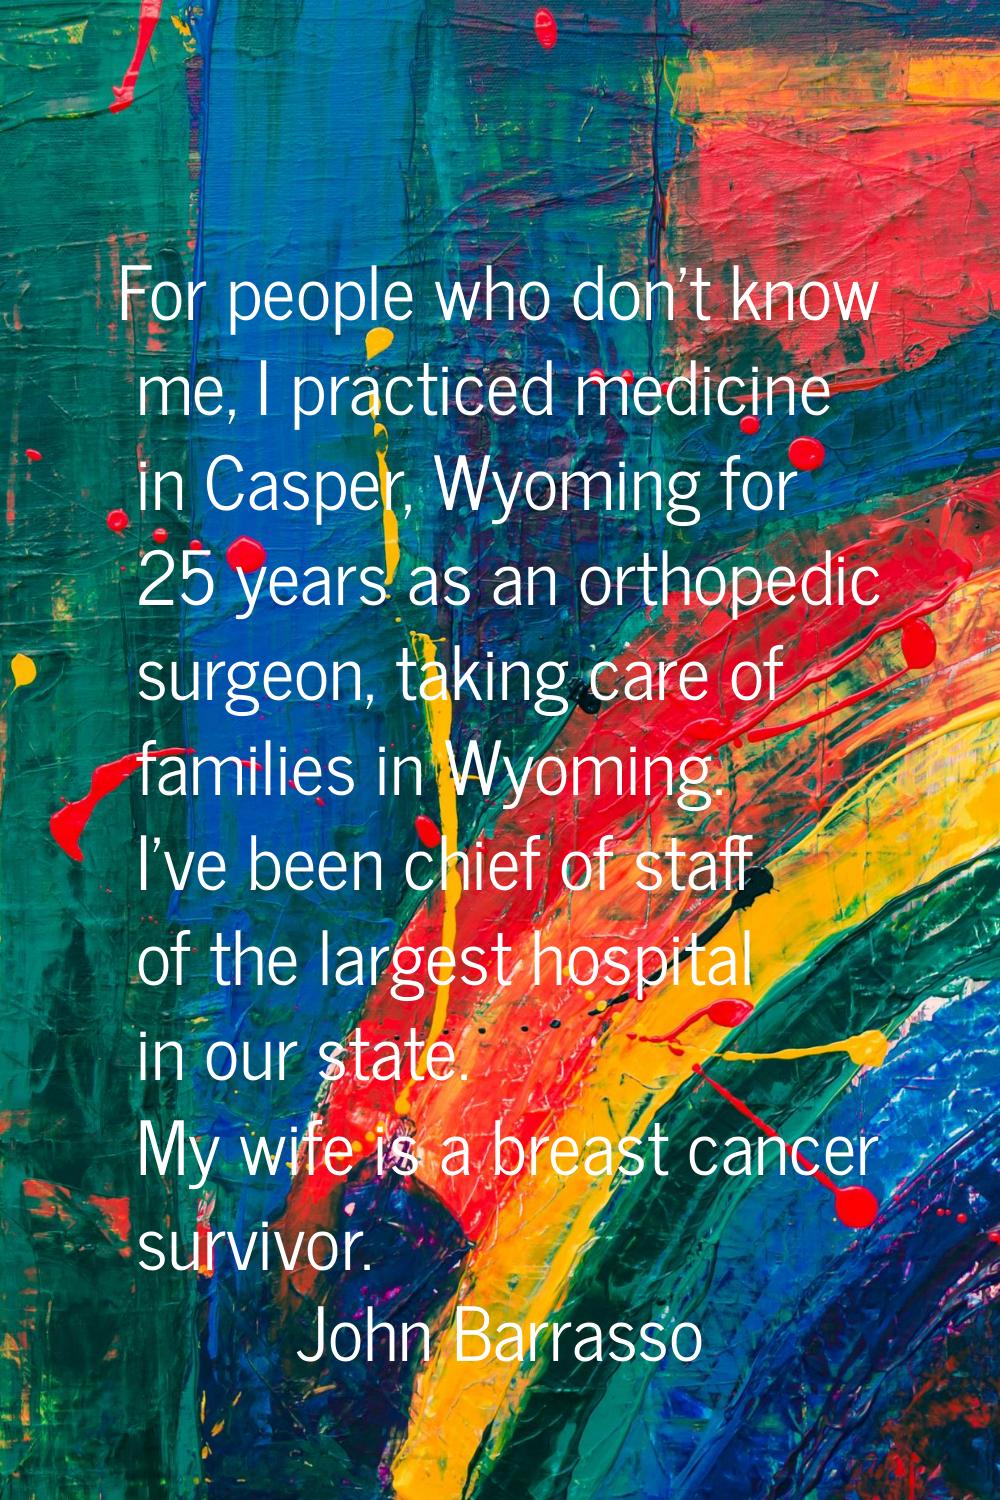 For people who don't know me, I practiced medicine in Casper, Wyoming for 25 years as an orthopedic